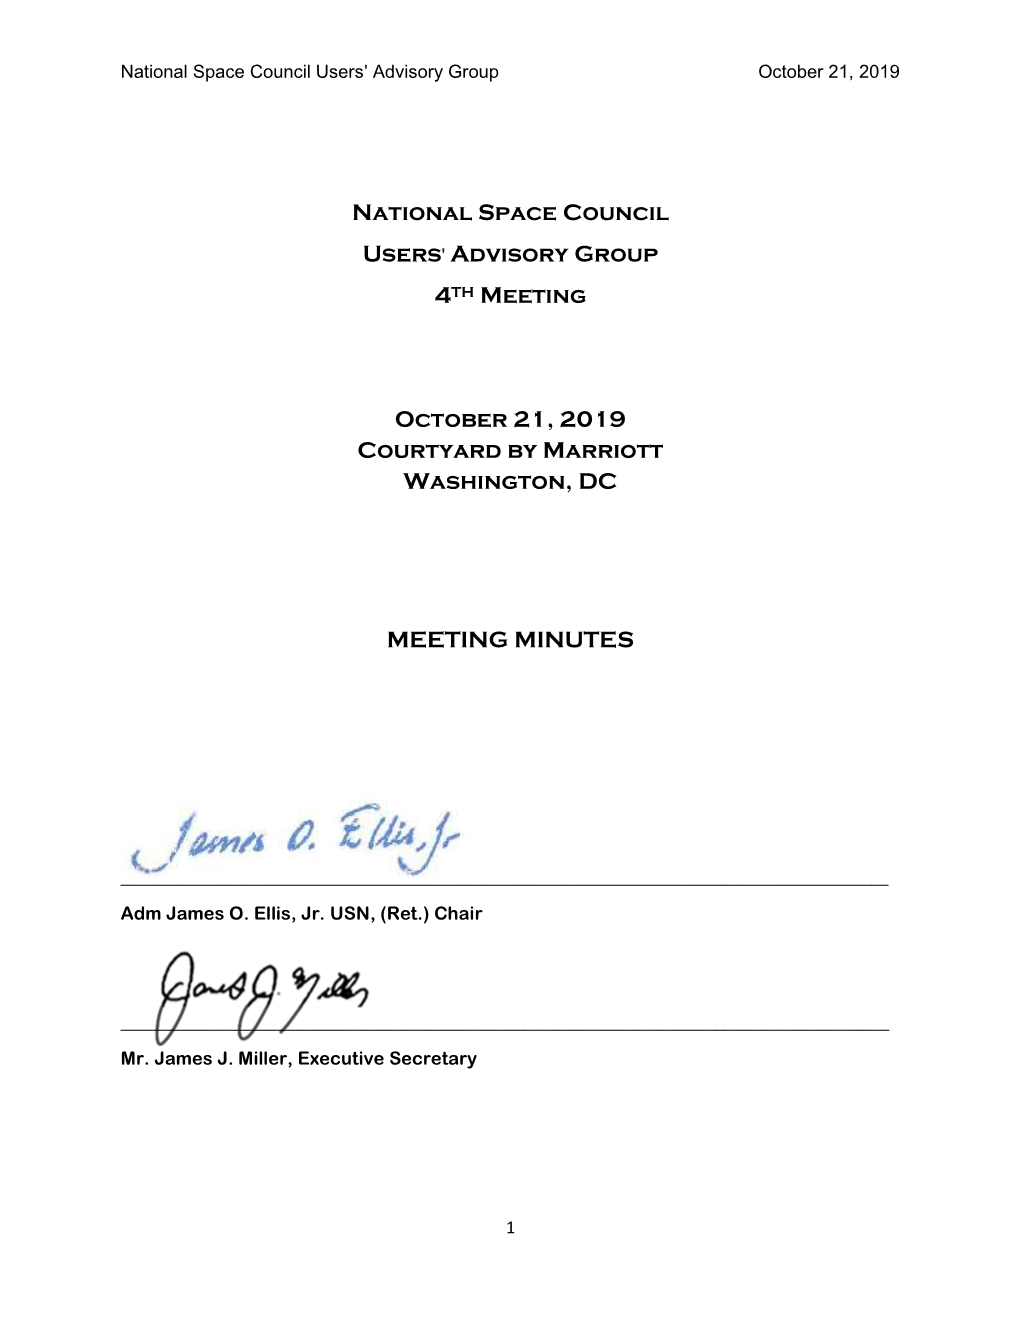 National Space Council Users' Advisory Group 4TH